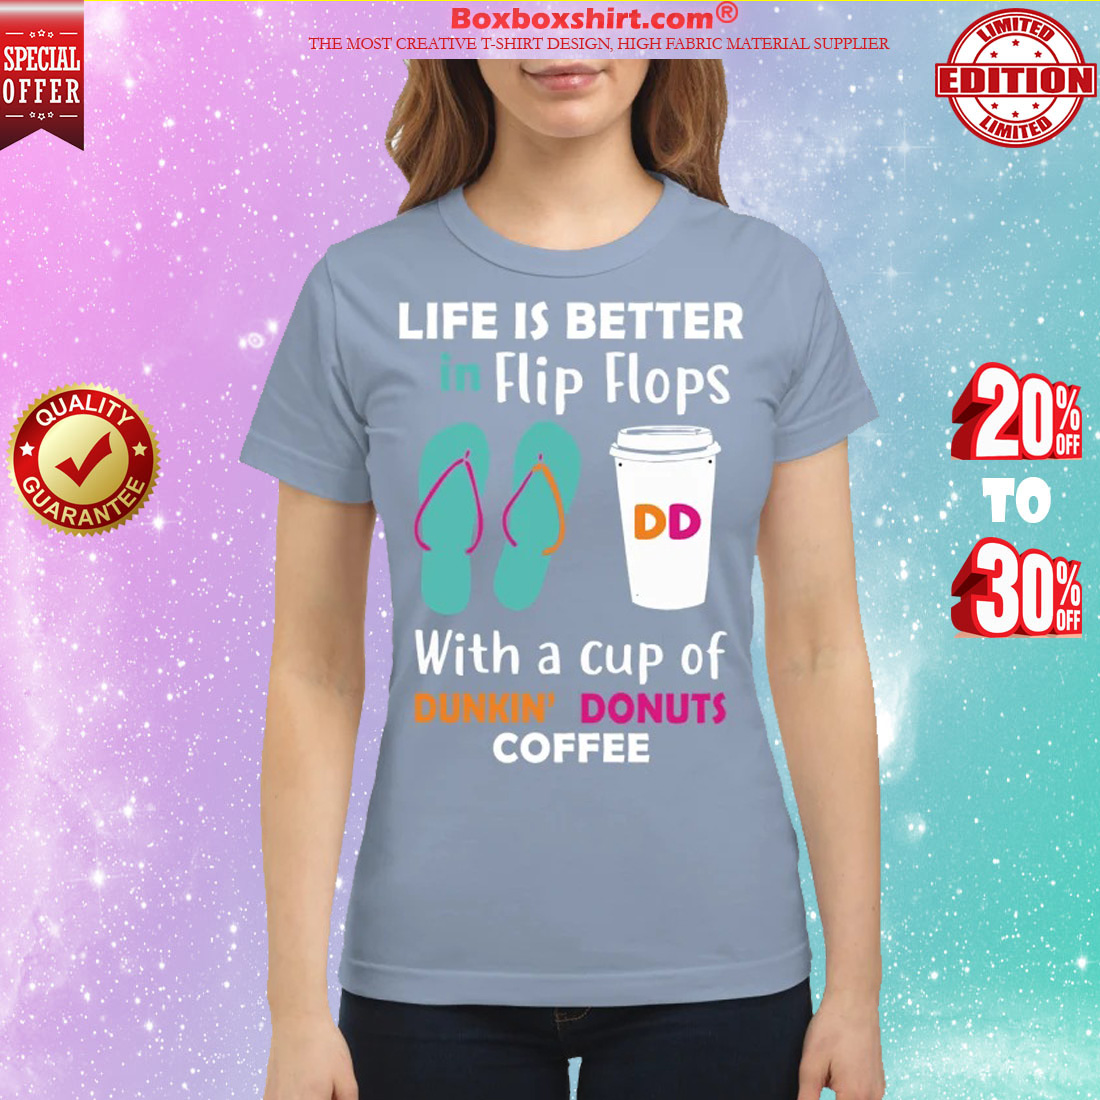 Life is better in flip flops with a cup of dunkin donuts coffee classic shirt